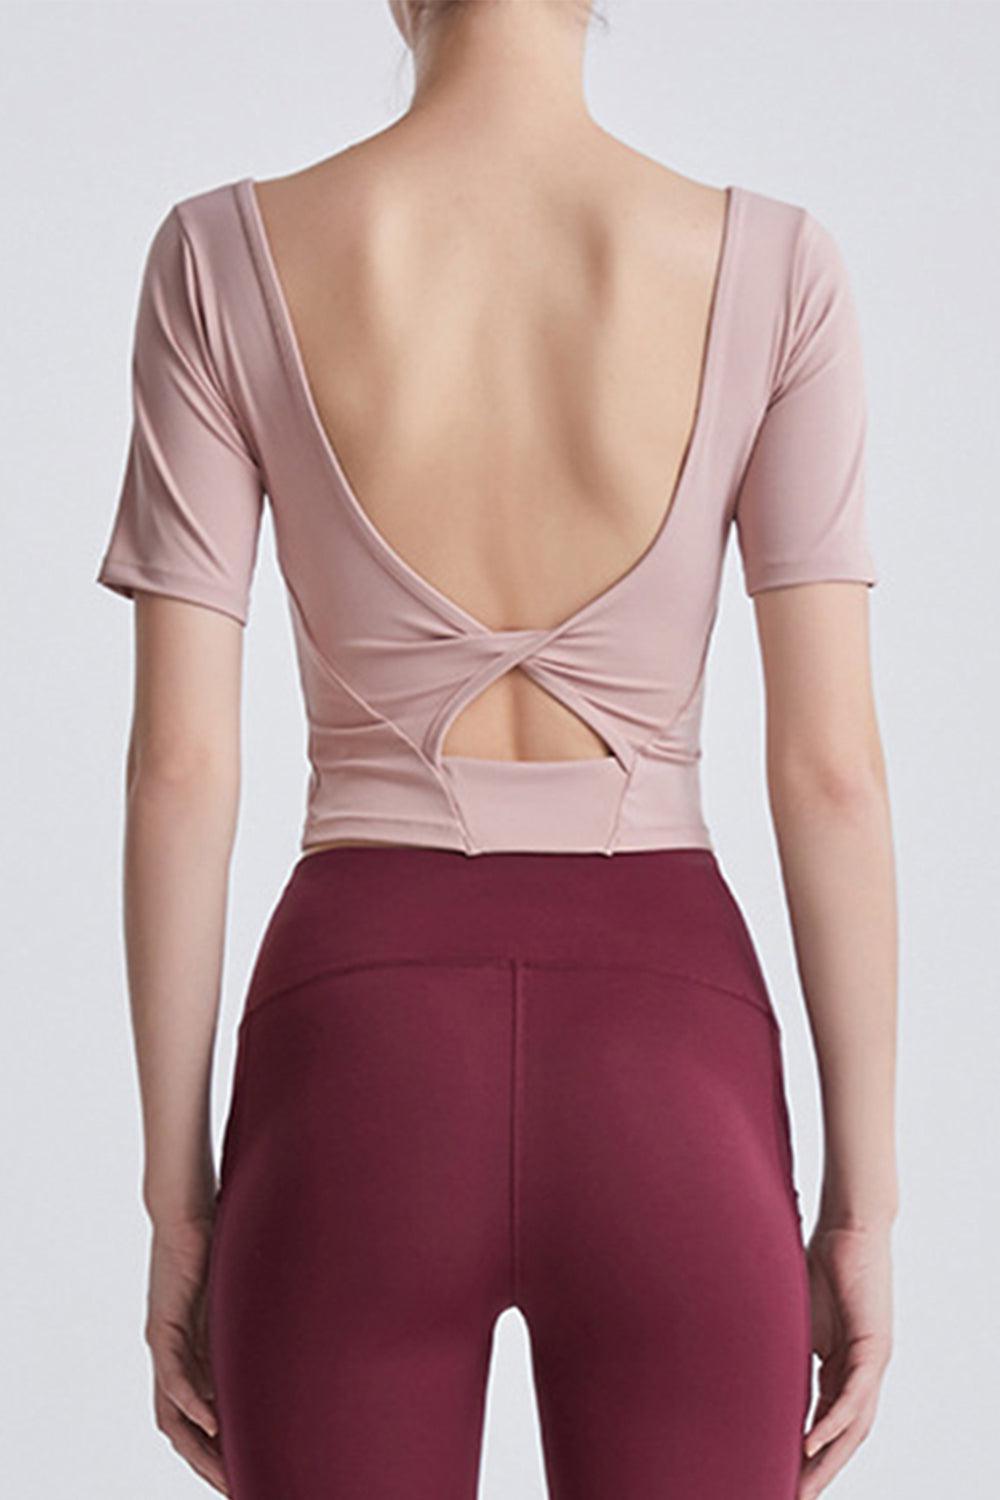 the back of a woman wearing a pink top and maroon leggings